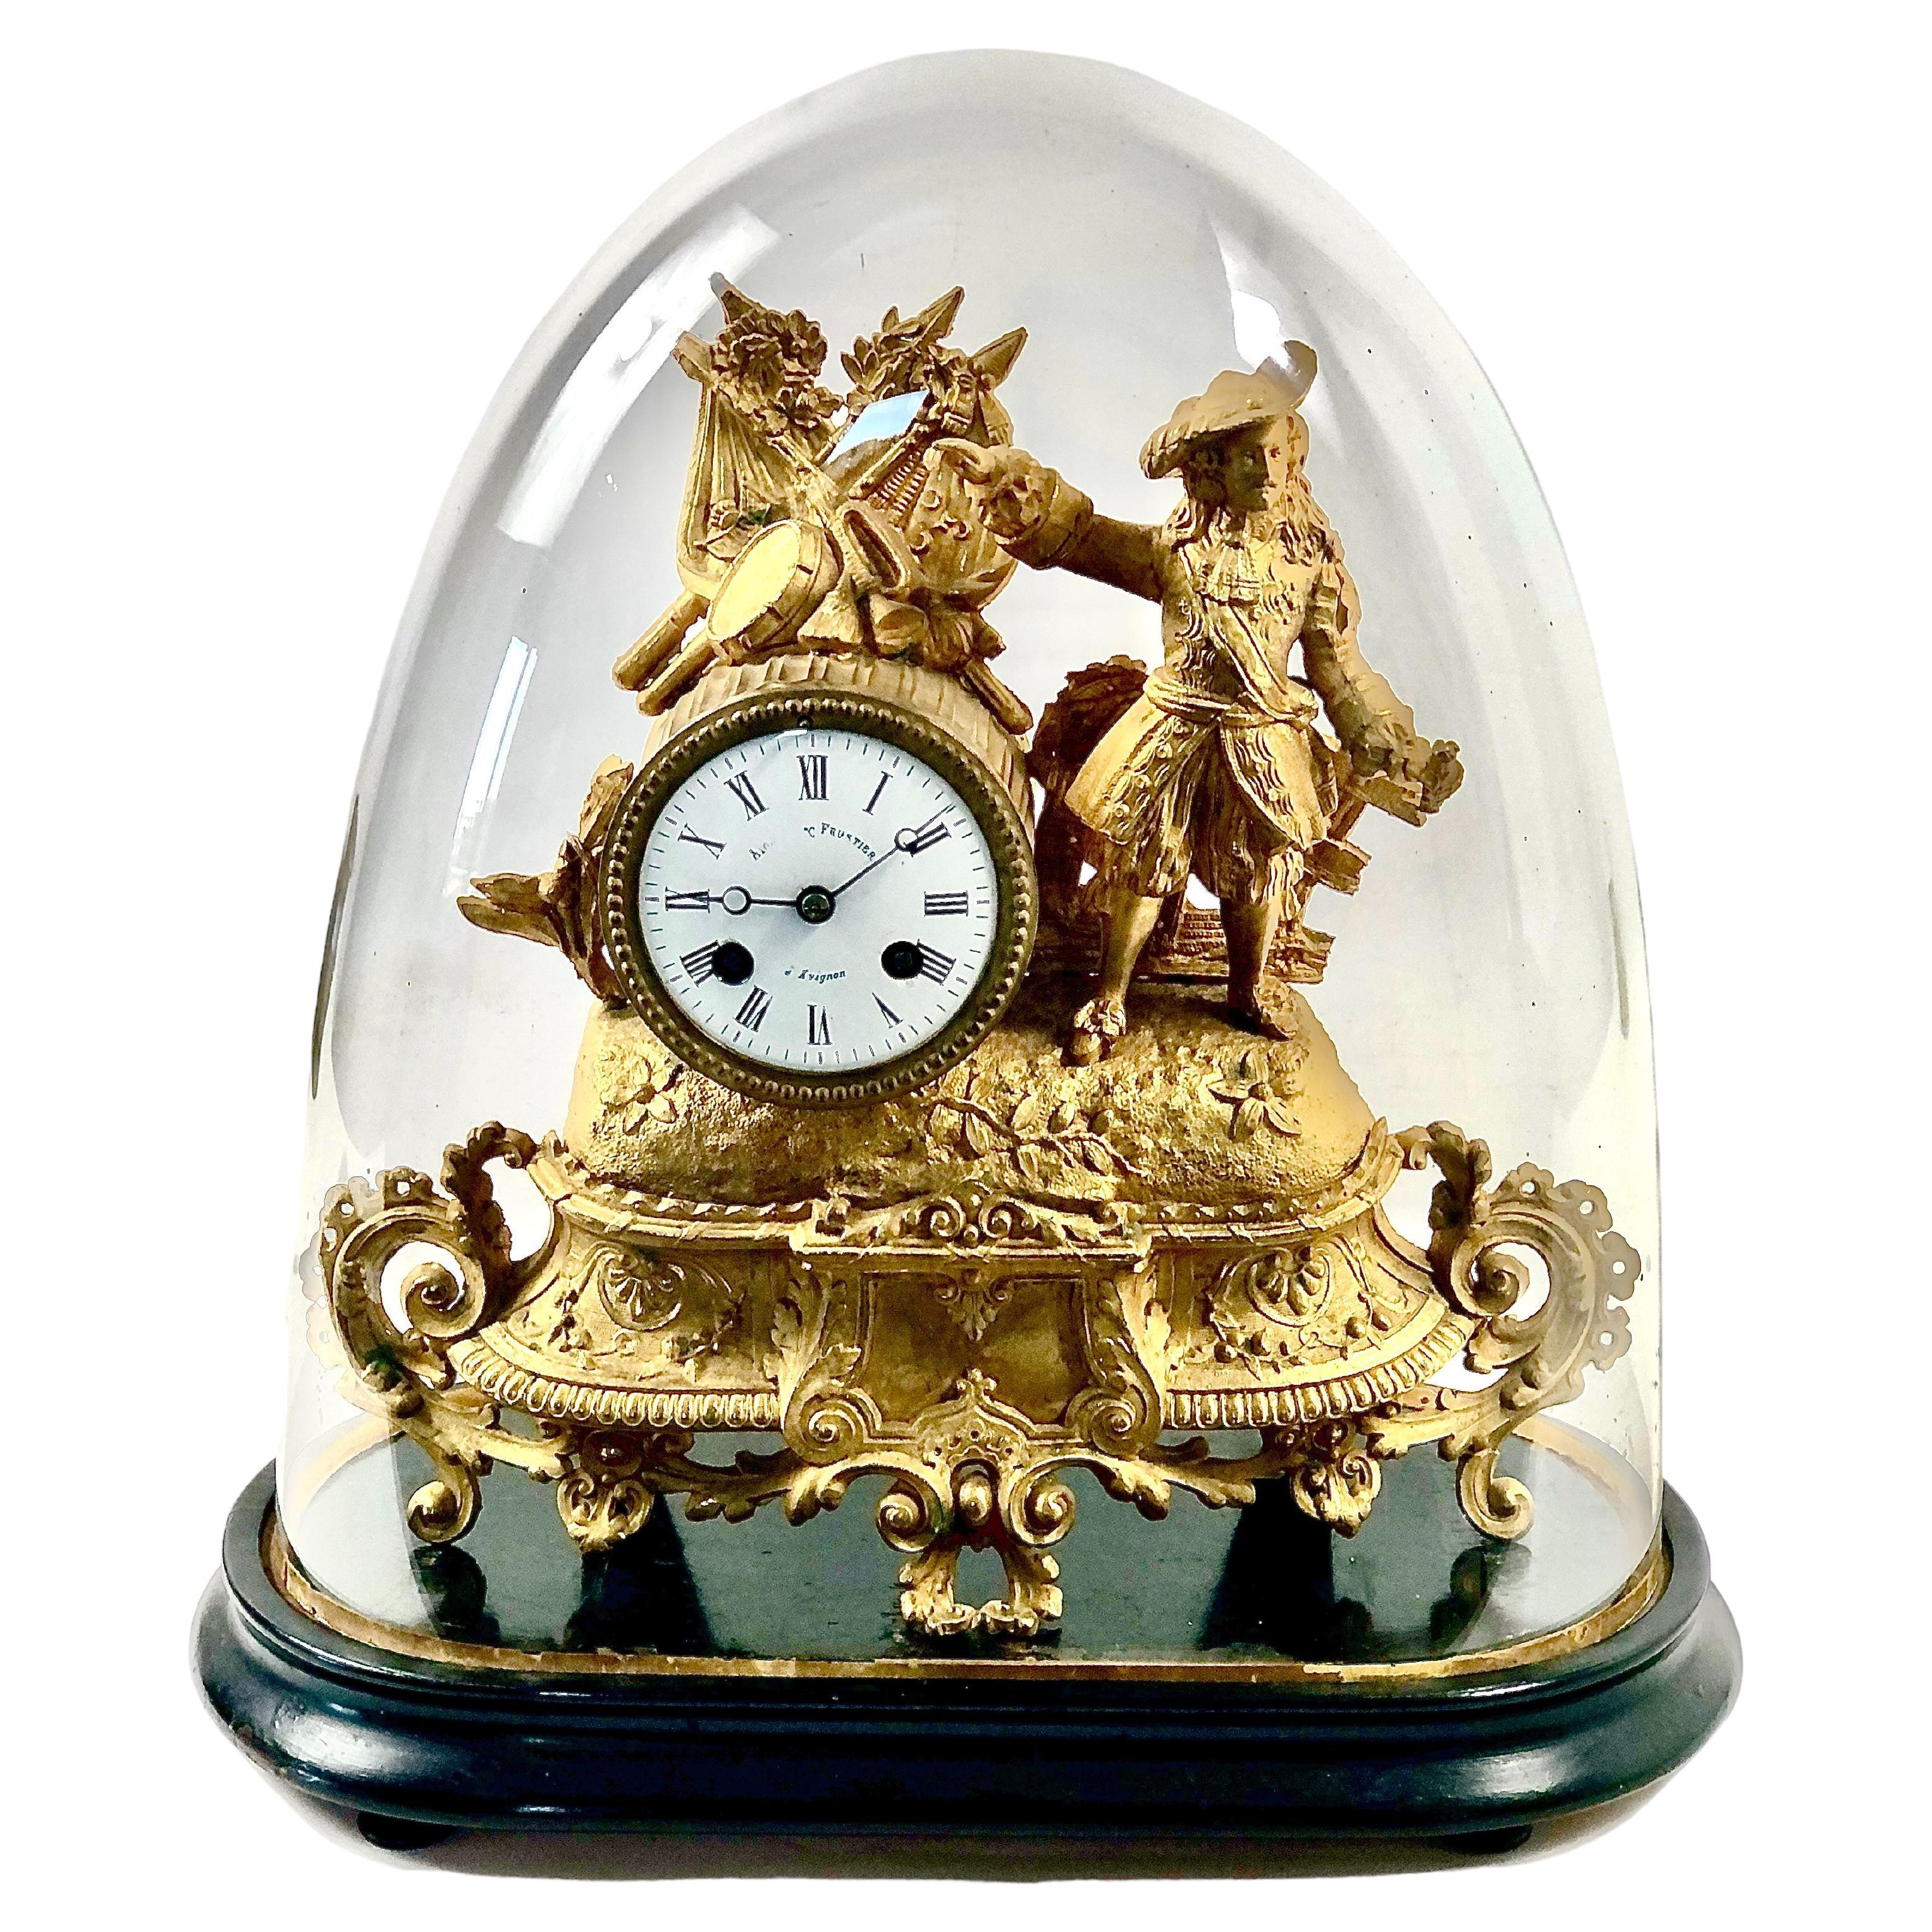 19th century French Gilt Mantel Clock under Glass Dome